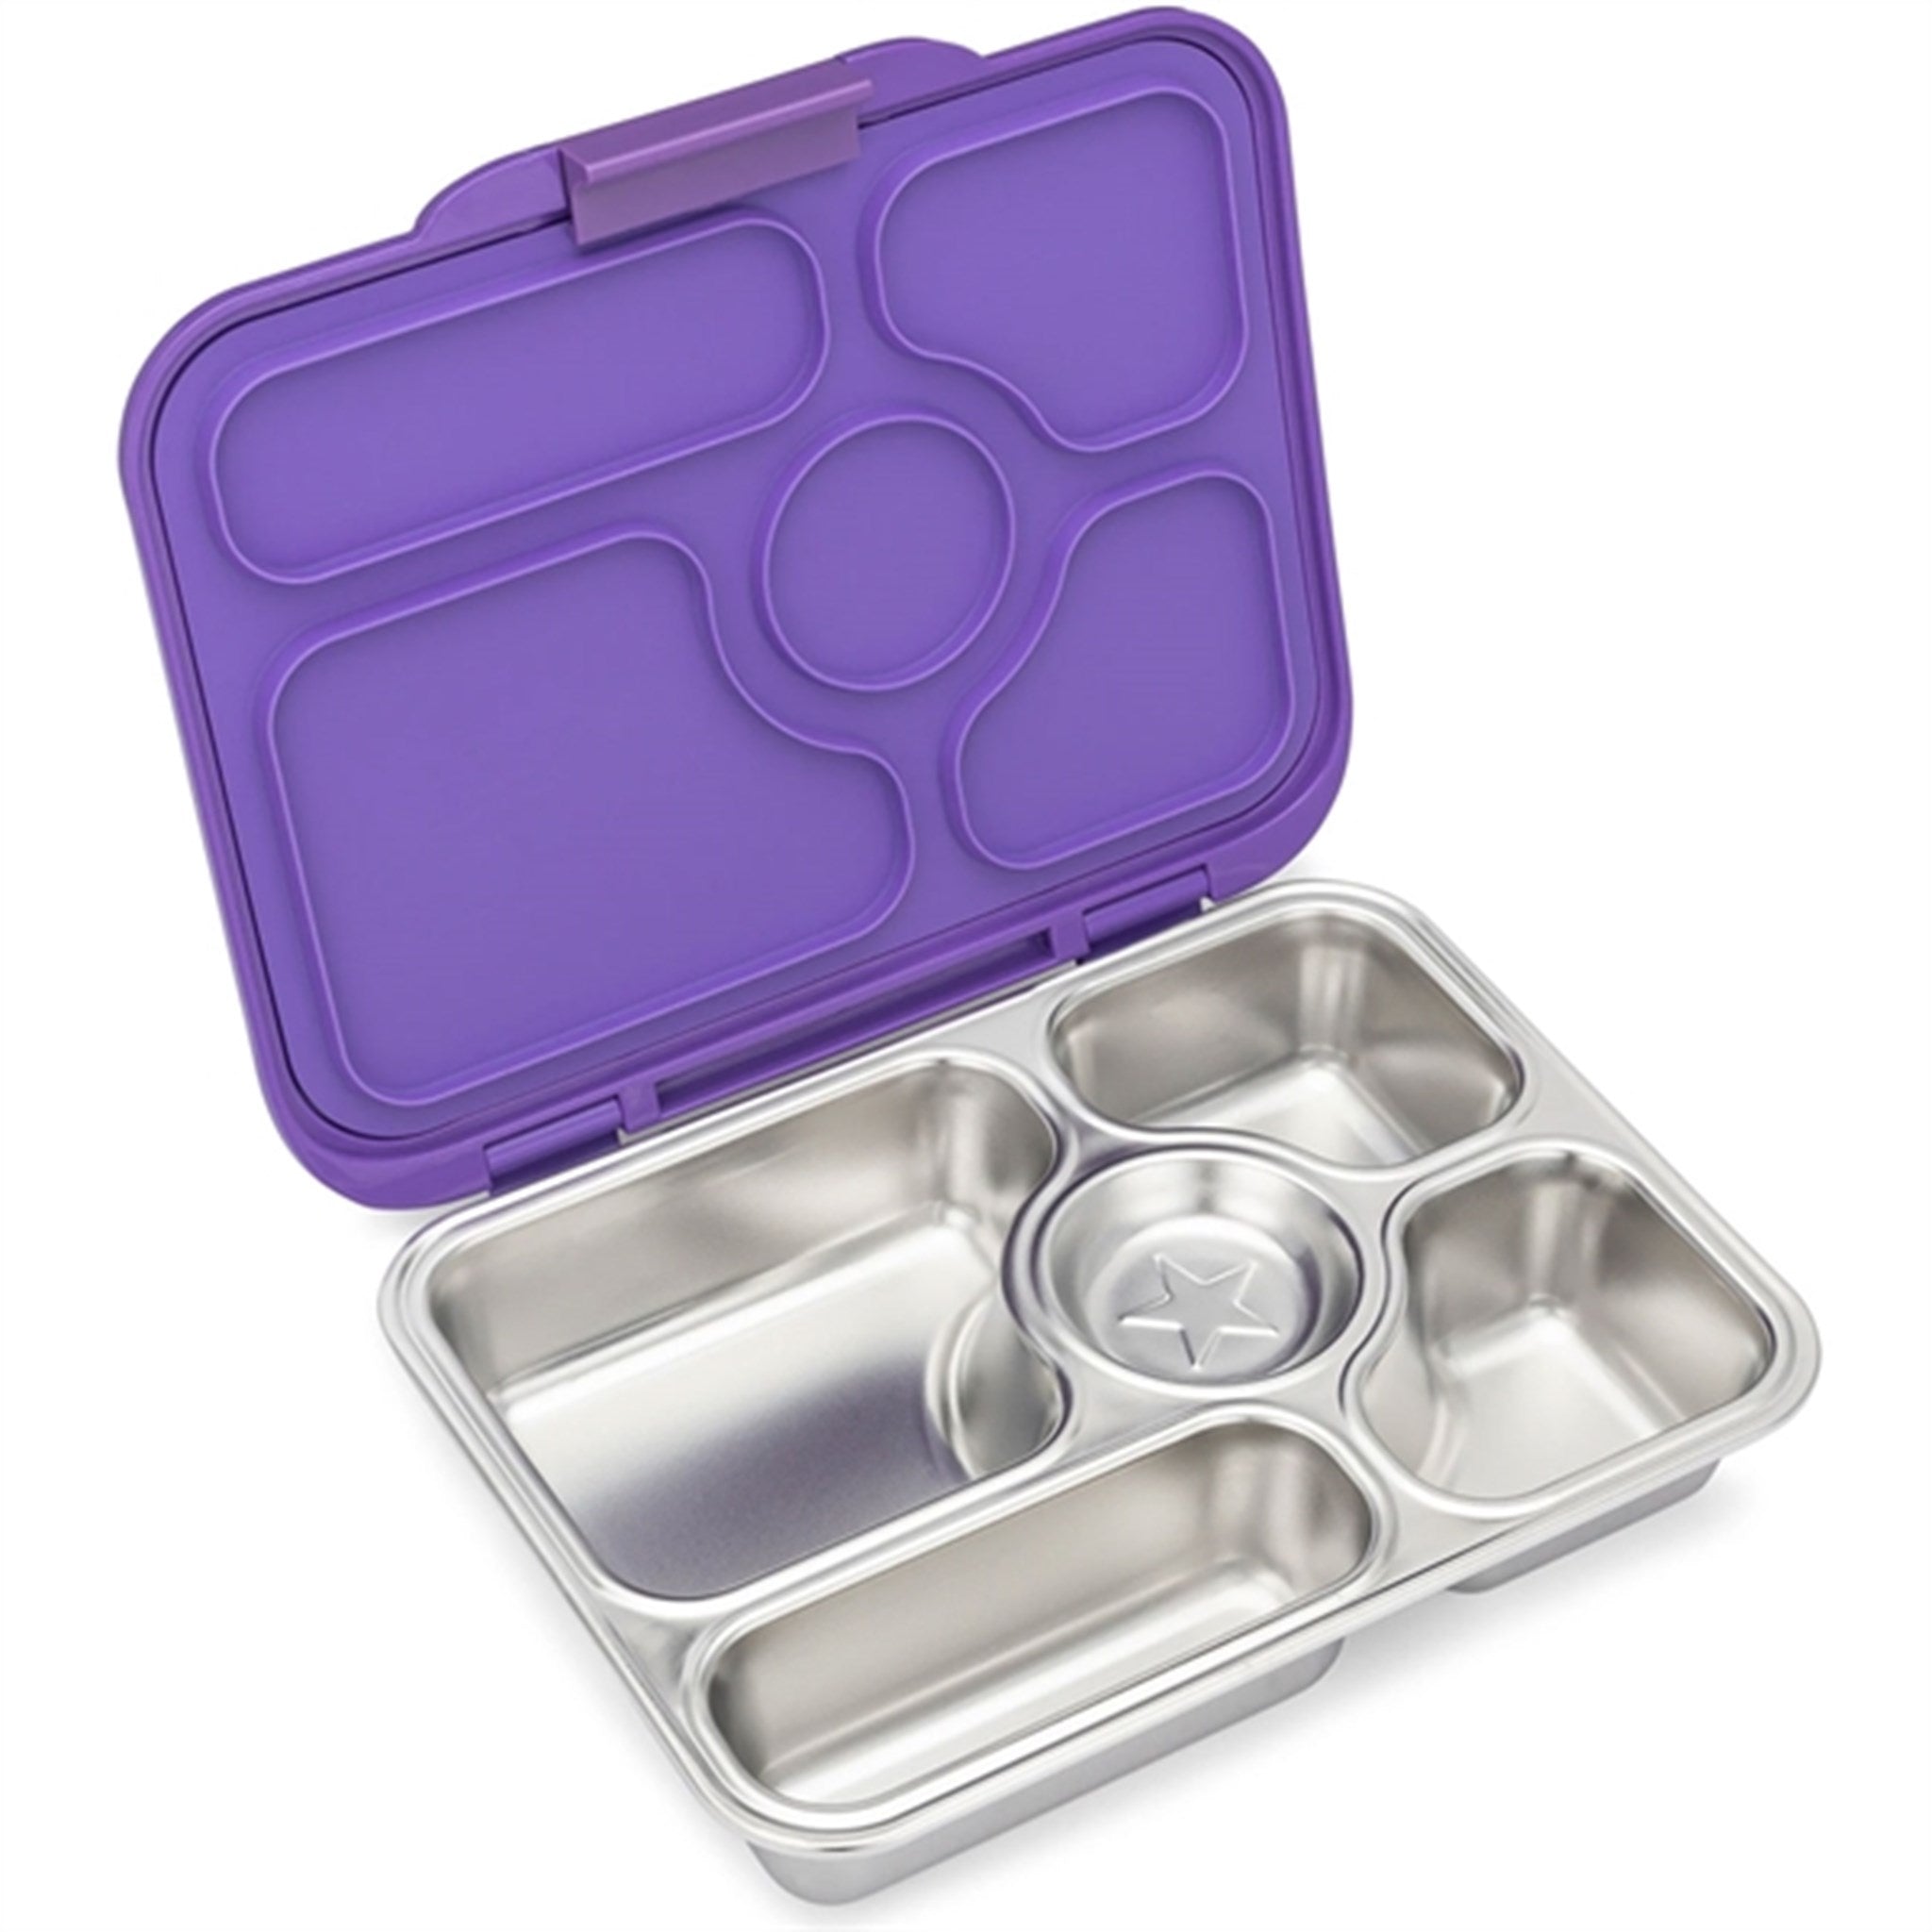 Yumbox Presto Stainless Steel Lunchlådor Remy Lavender